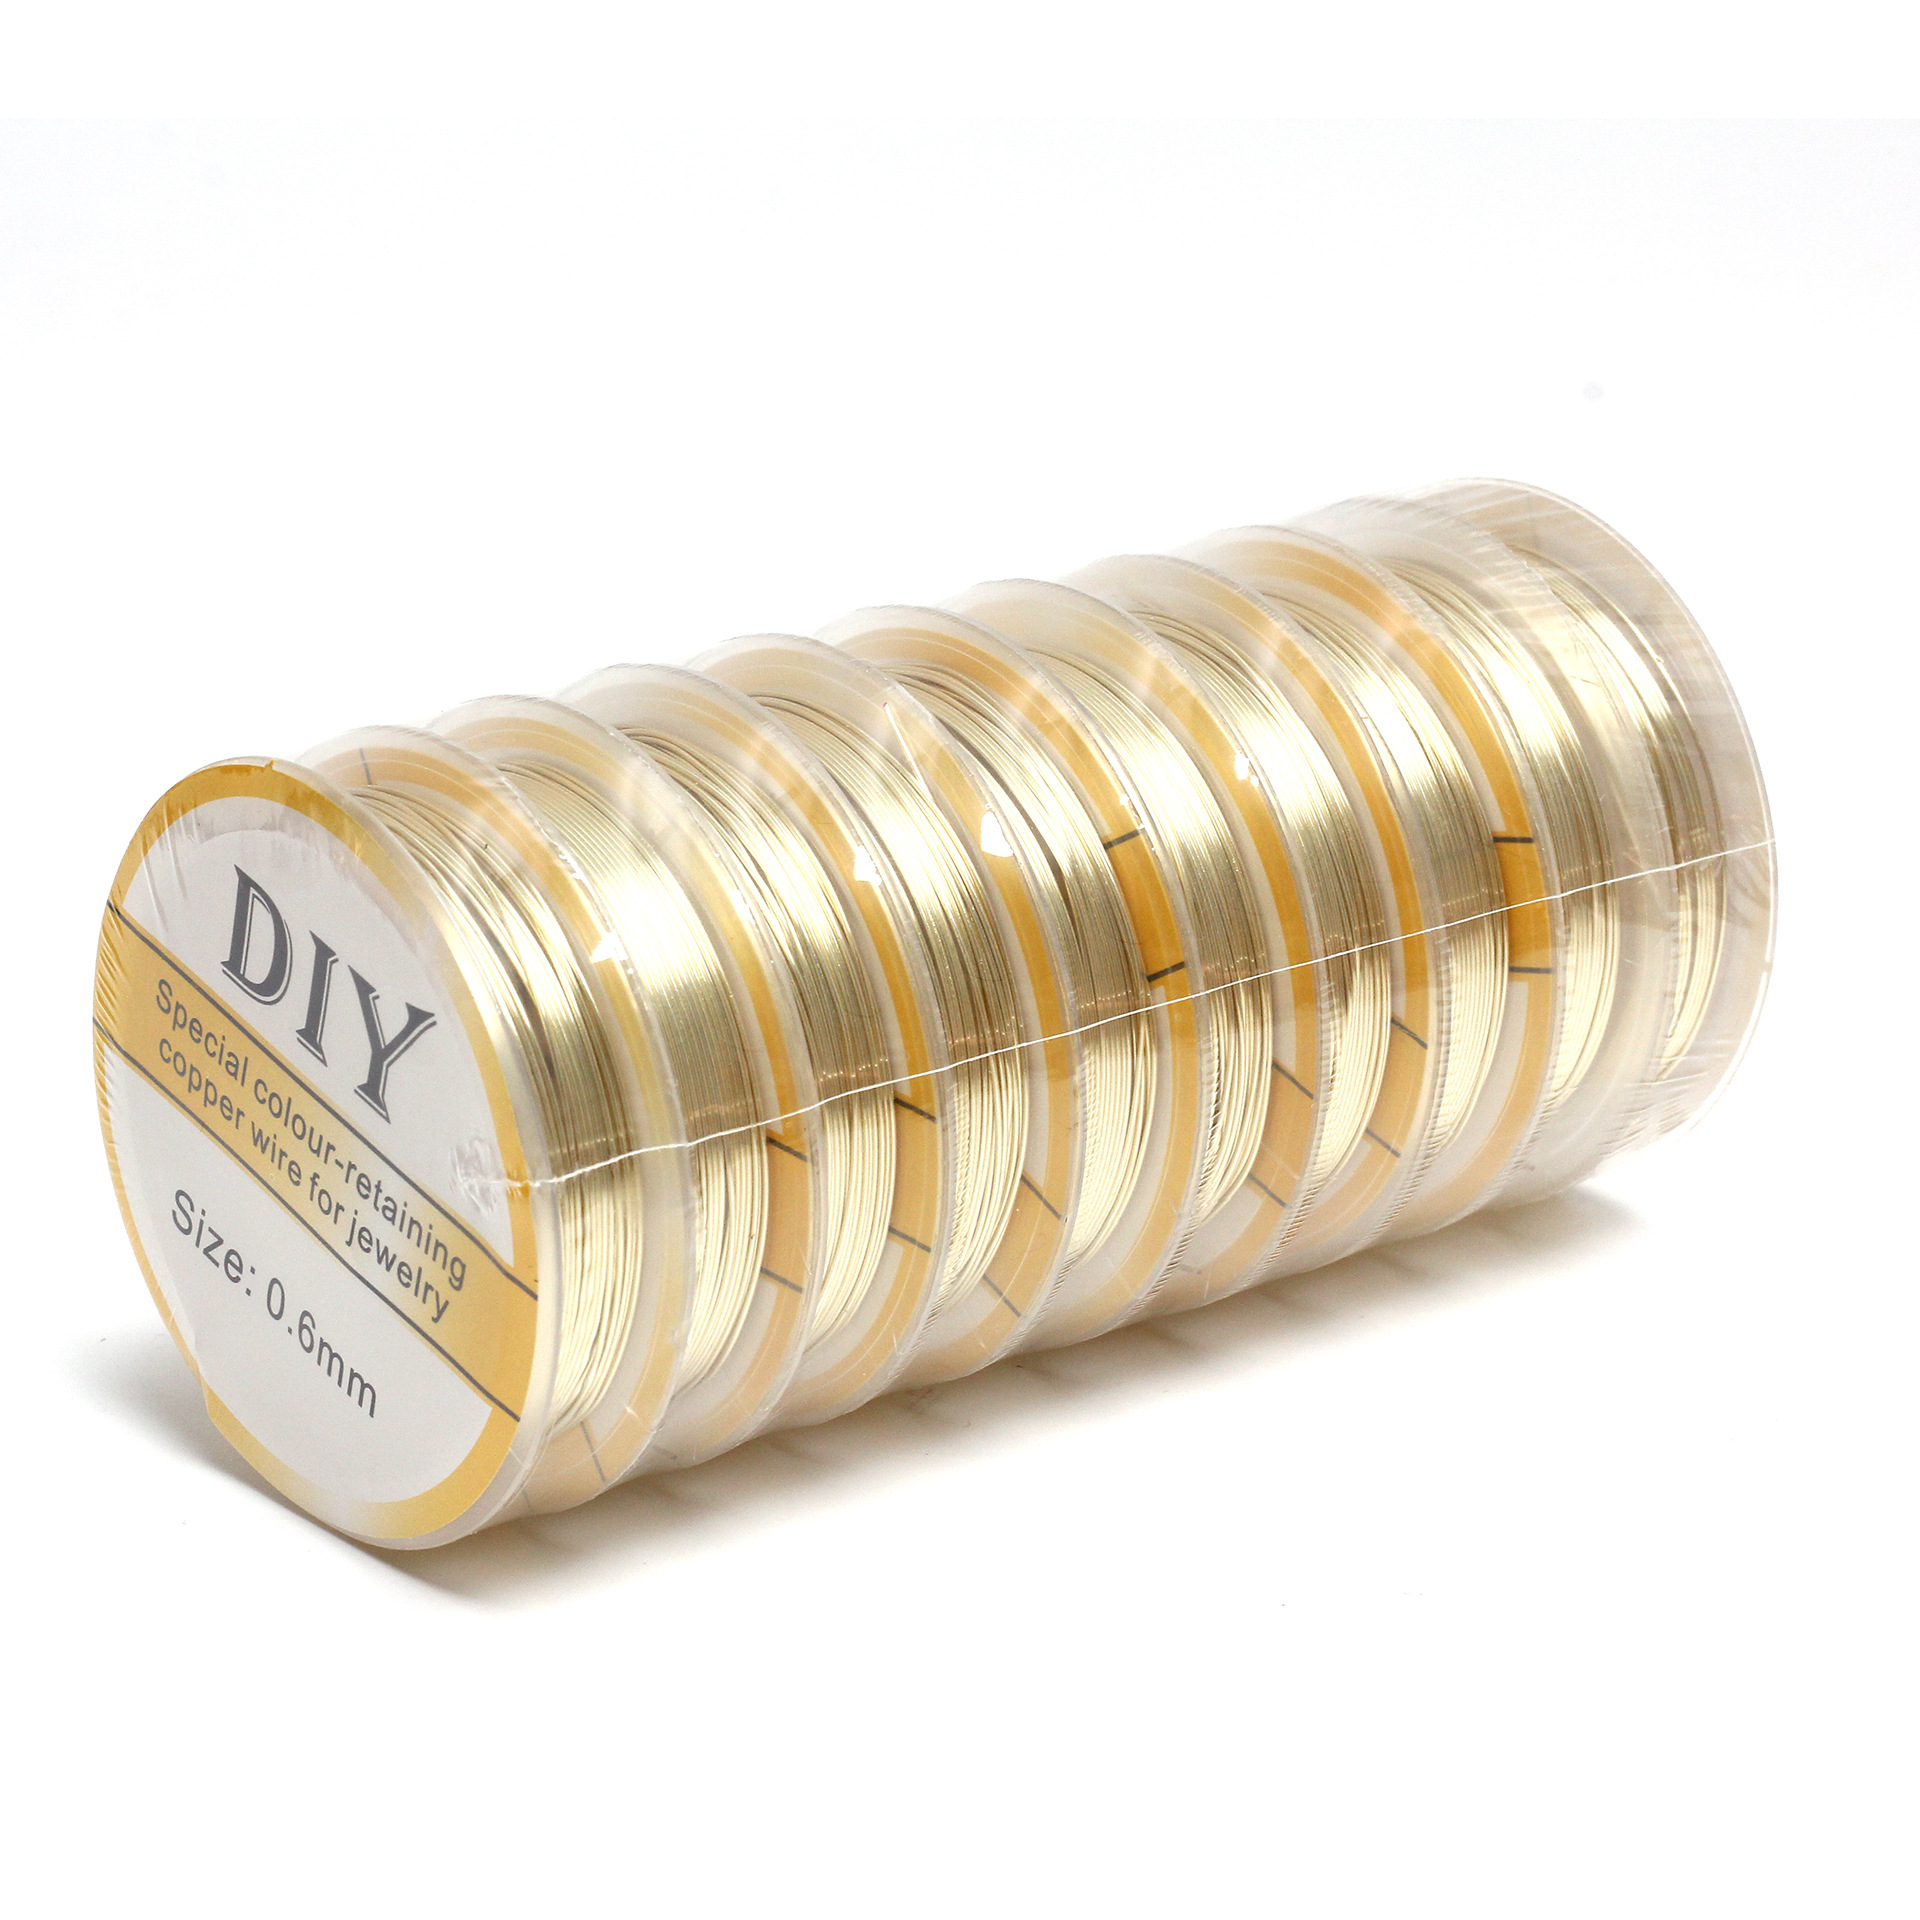 Light Gold 0.8mm copper wire one 2.6m